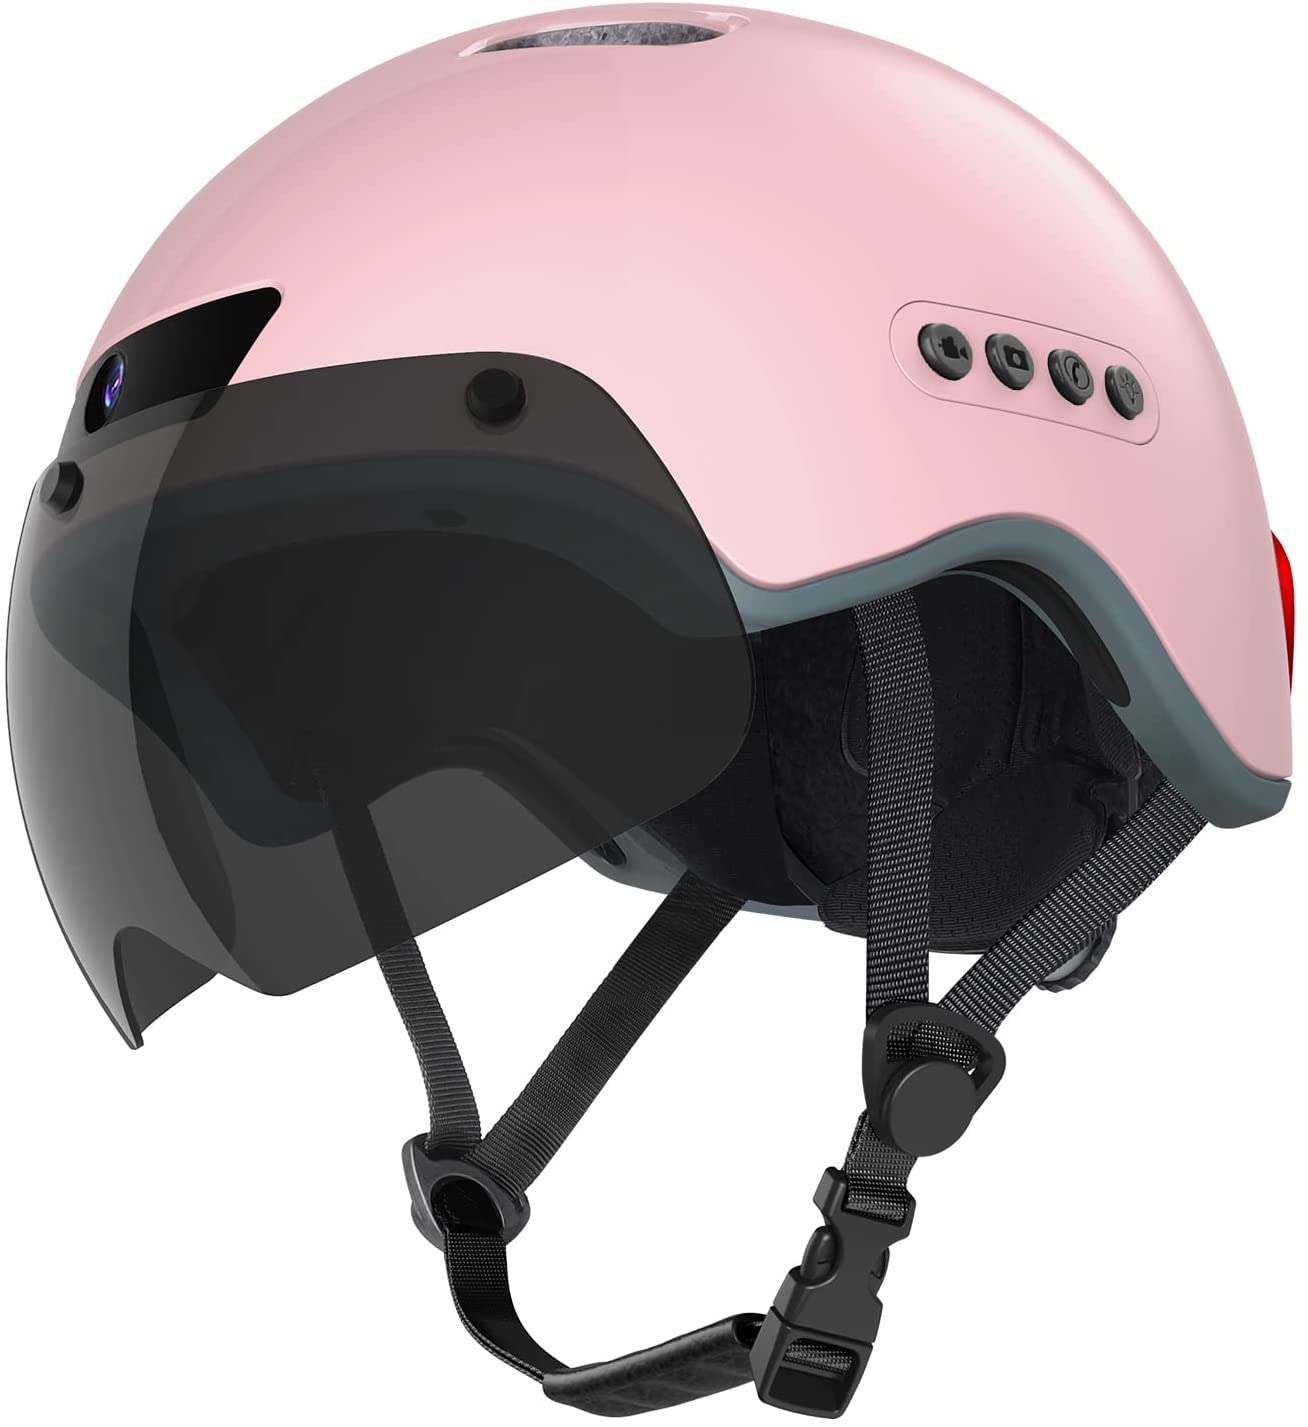 Bluetooth Turn Signal Smart Helmet with Built-in Driving Recorder Camera